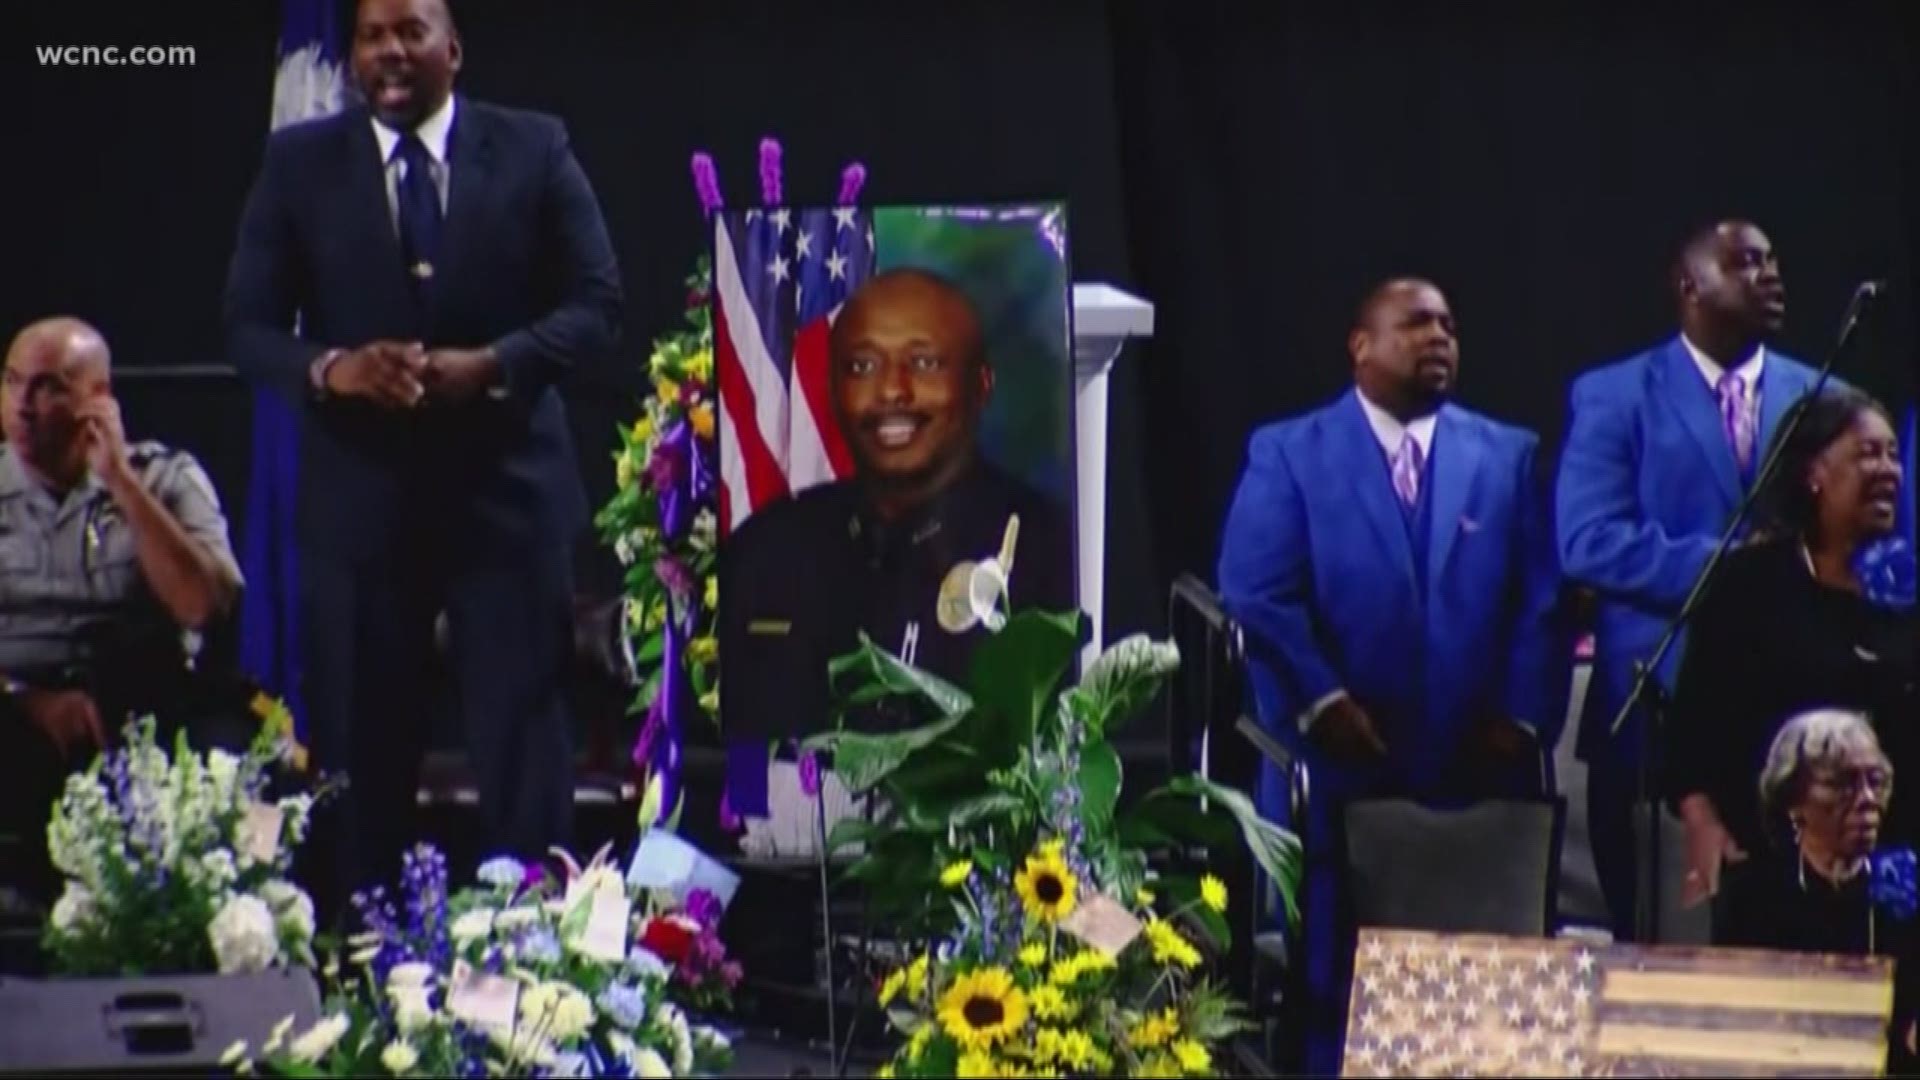 Thousands of people turned out for the funeral of Sergeant Terrence Carraway, who was killed during a shooting in Florence, SC last week.